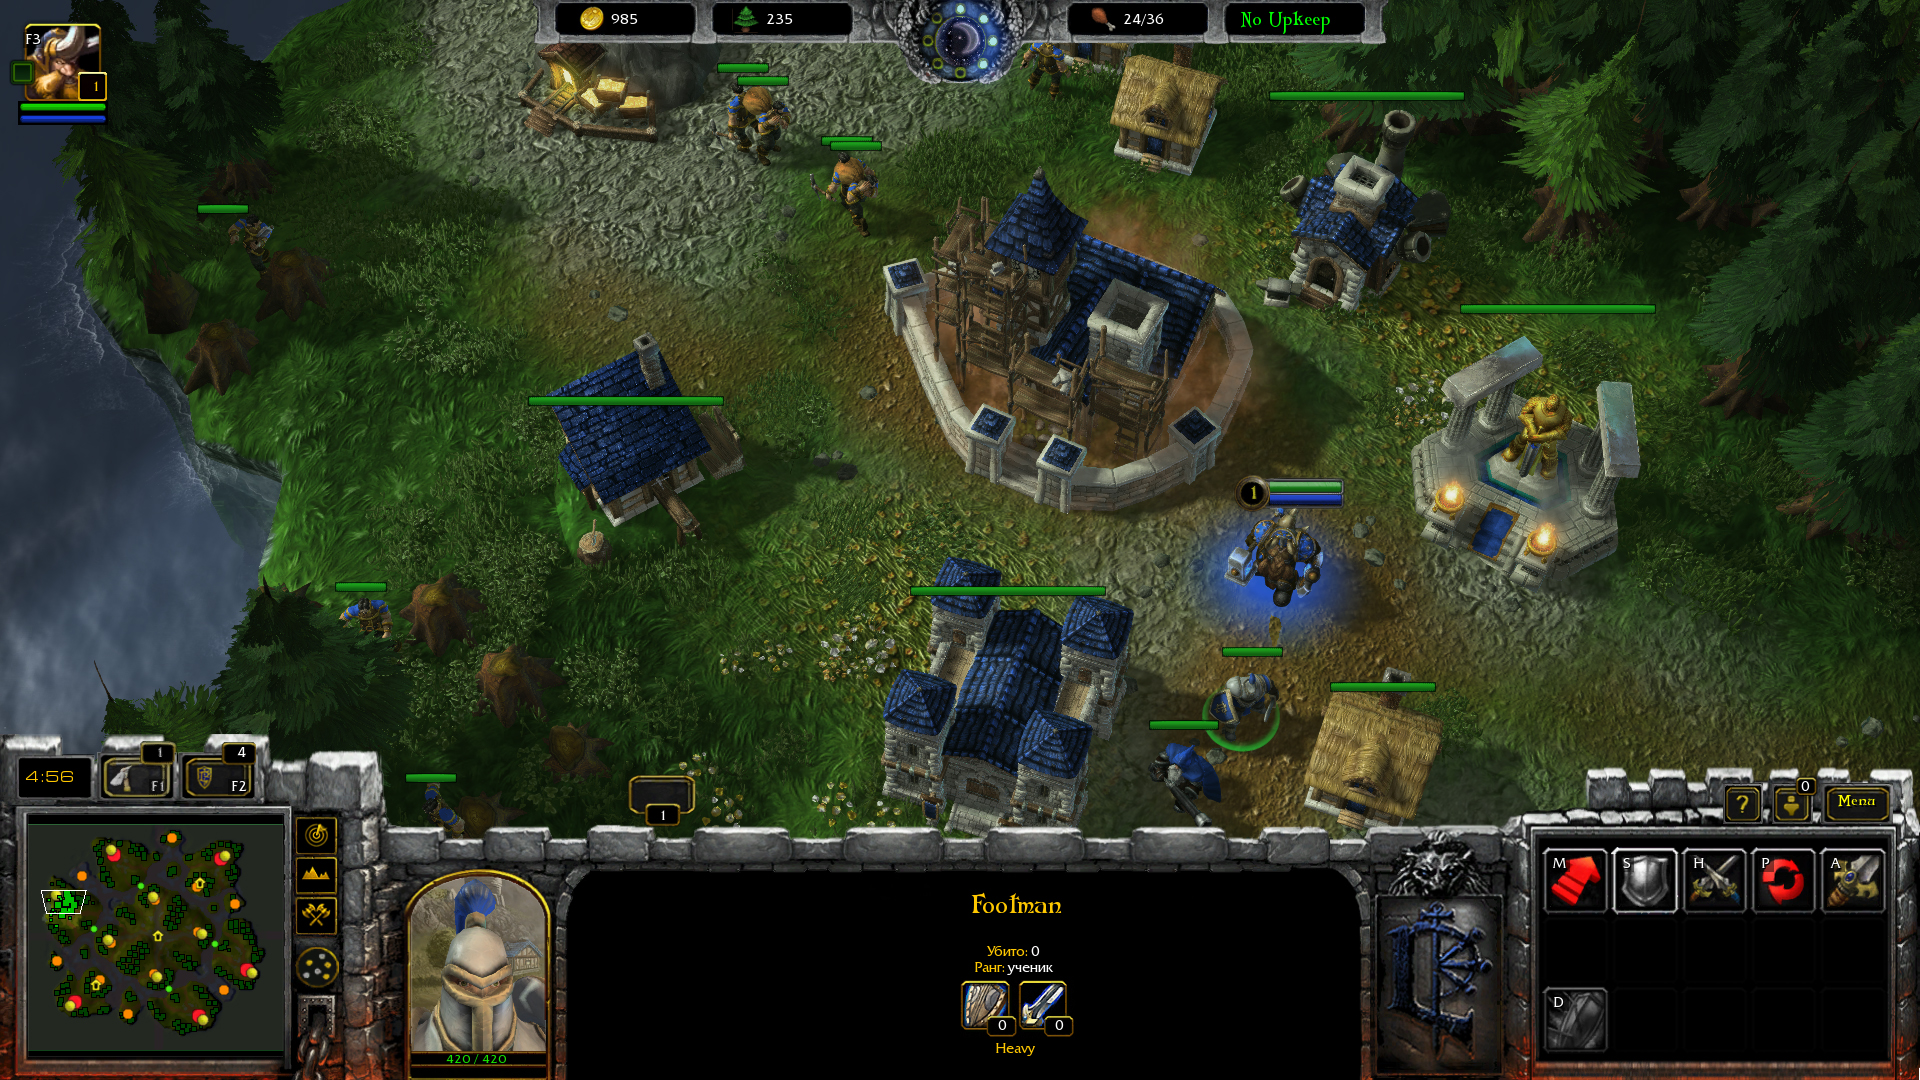 Atmosphere is just like in WC 3 due to all of the interface elements were made in order to fit WC 3 style